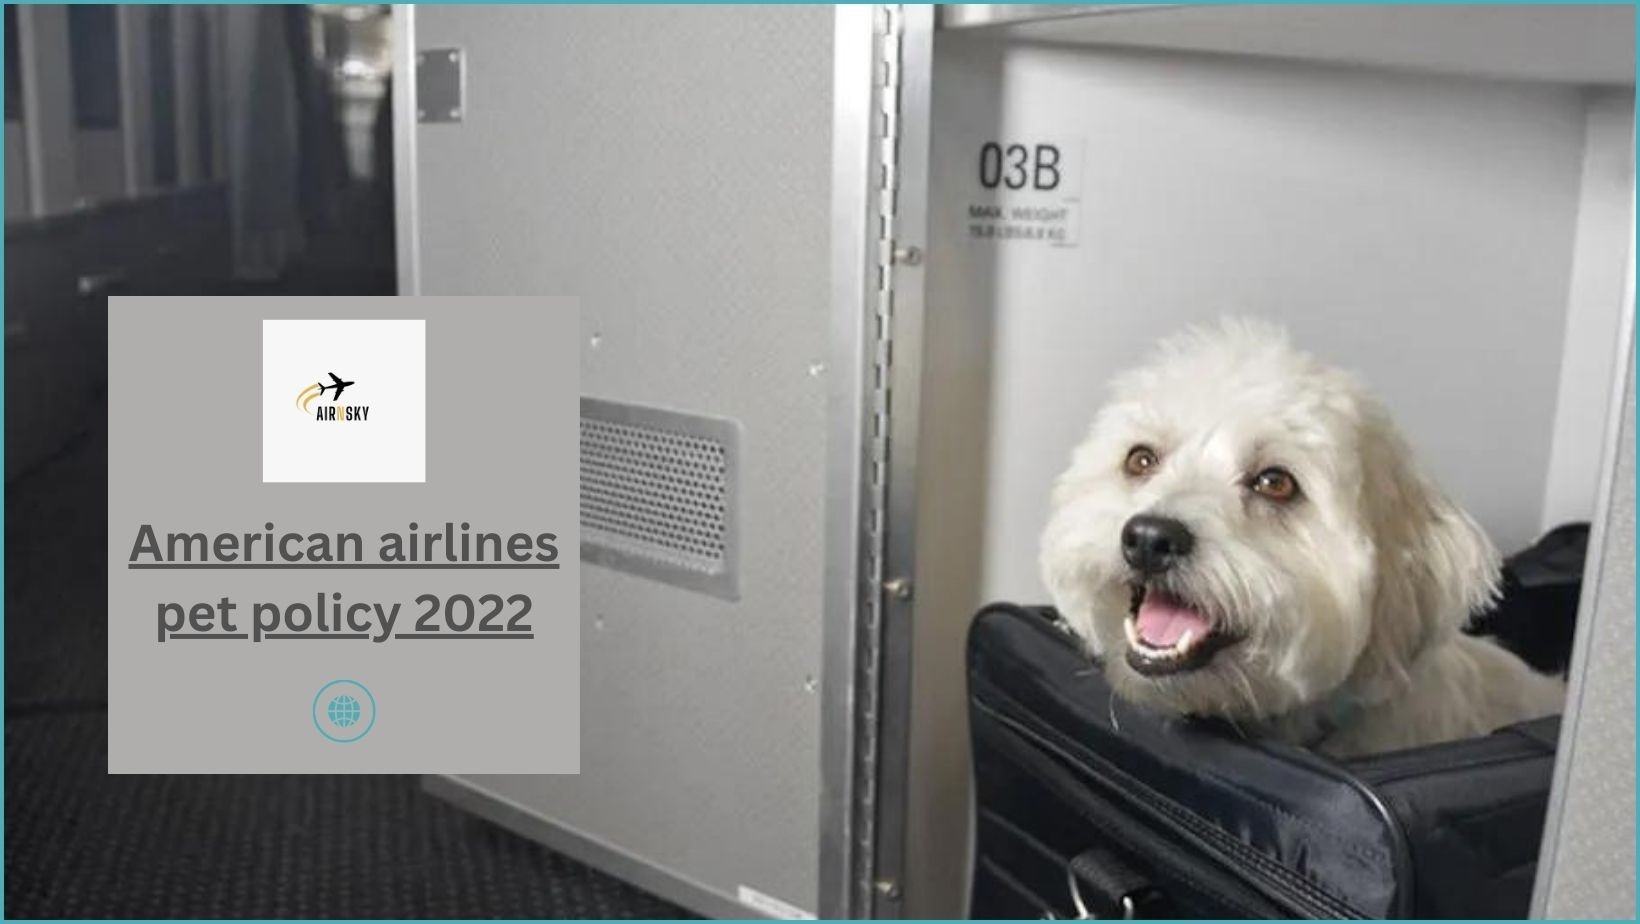 American airlines pet policy 2022